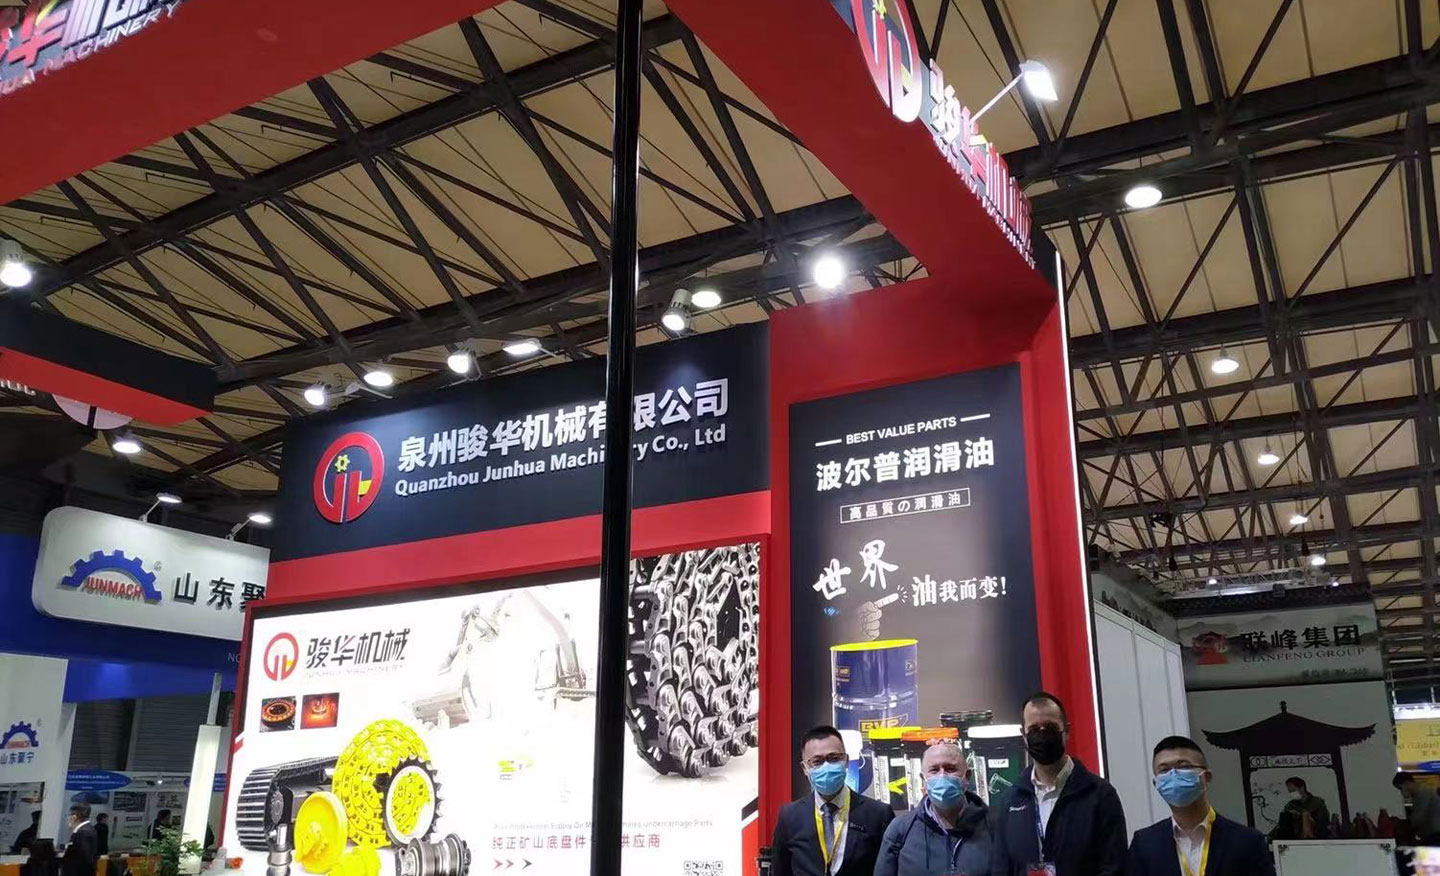 May 19 - May 22 2021 Changsha International Construction Equipment Exhibition, Booth No. W4-T046